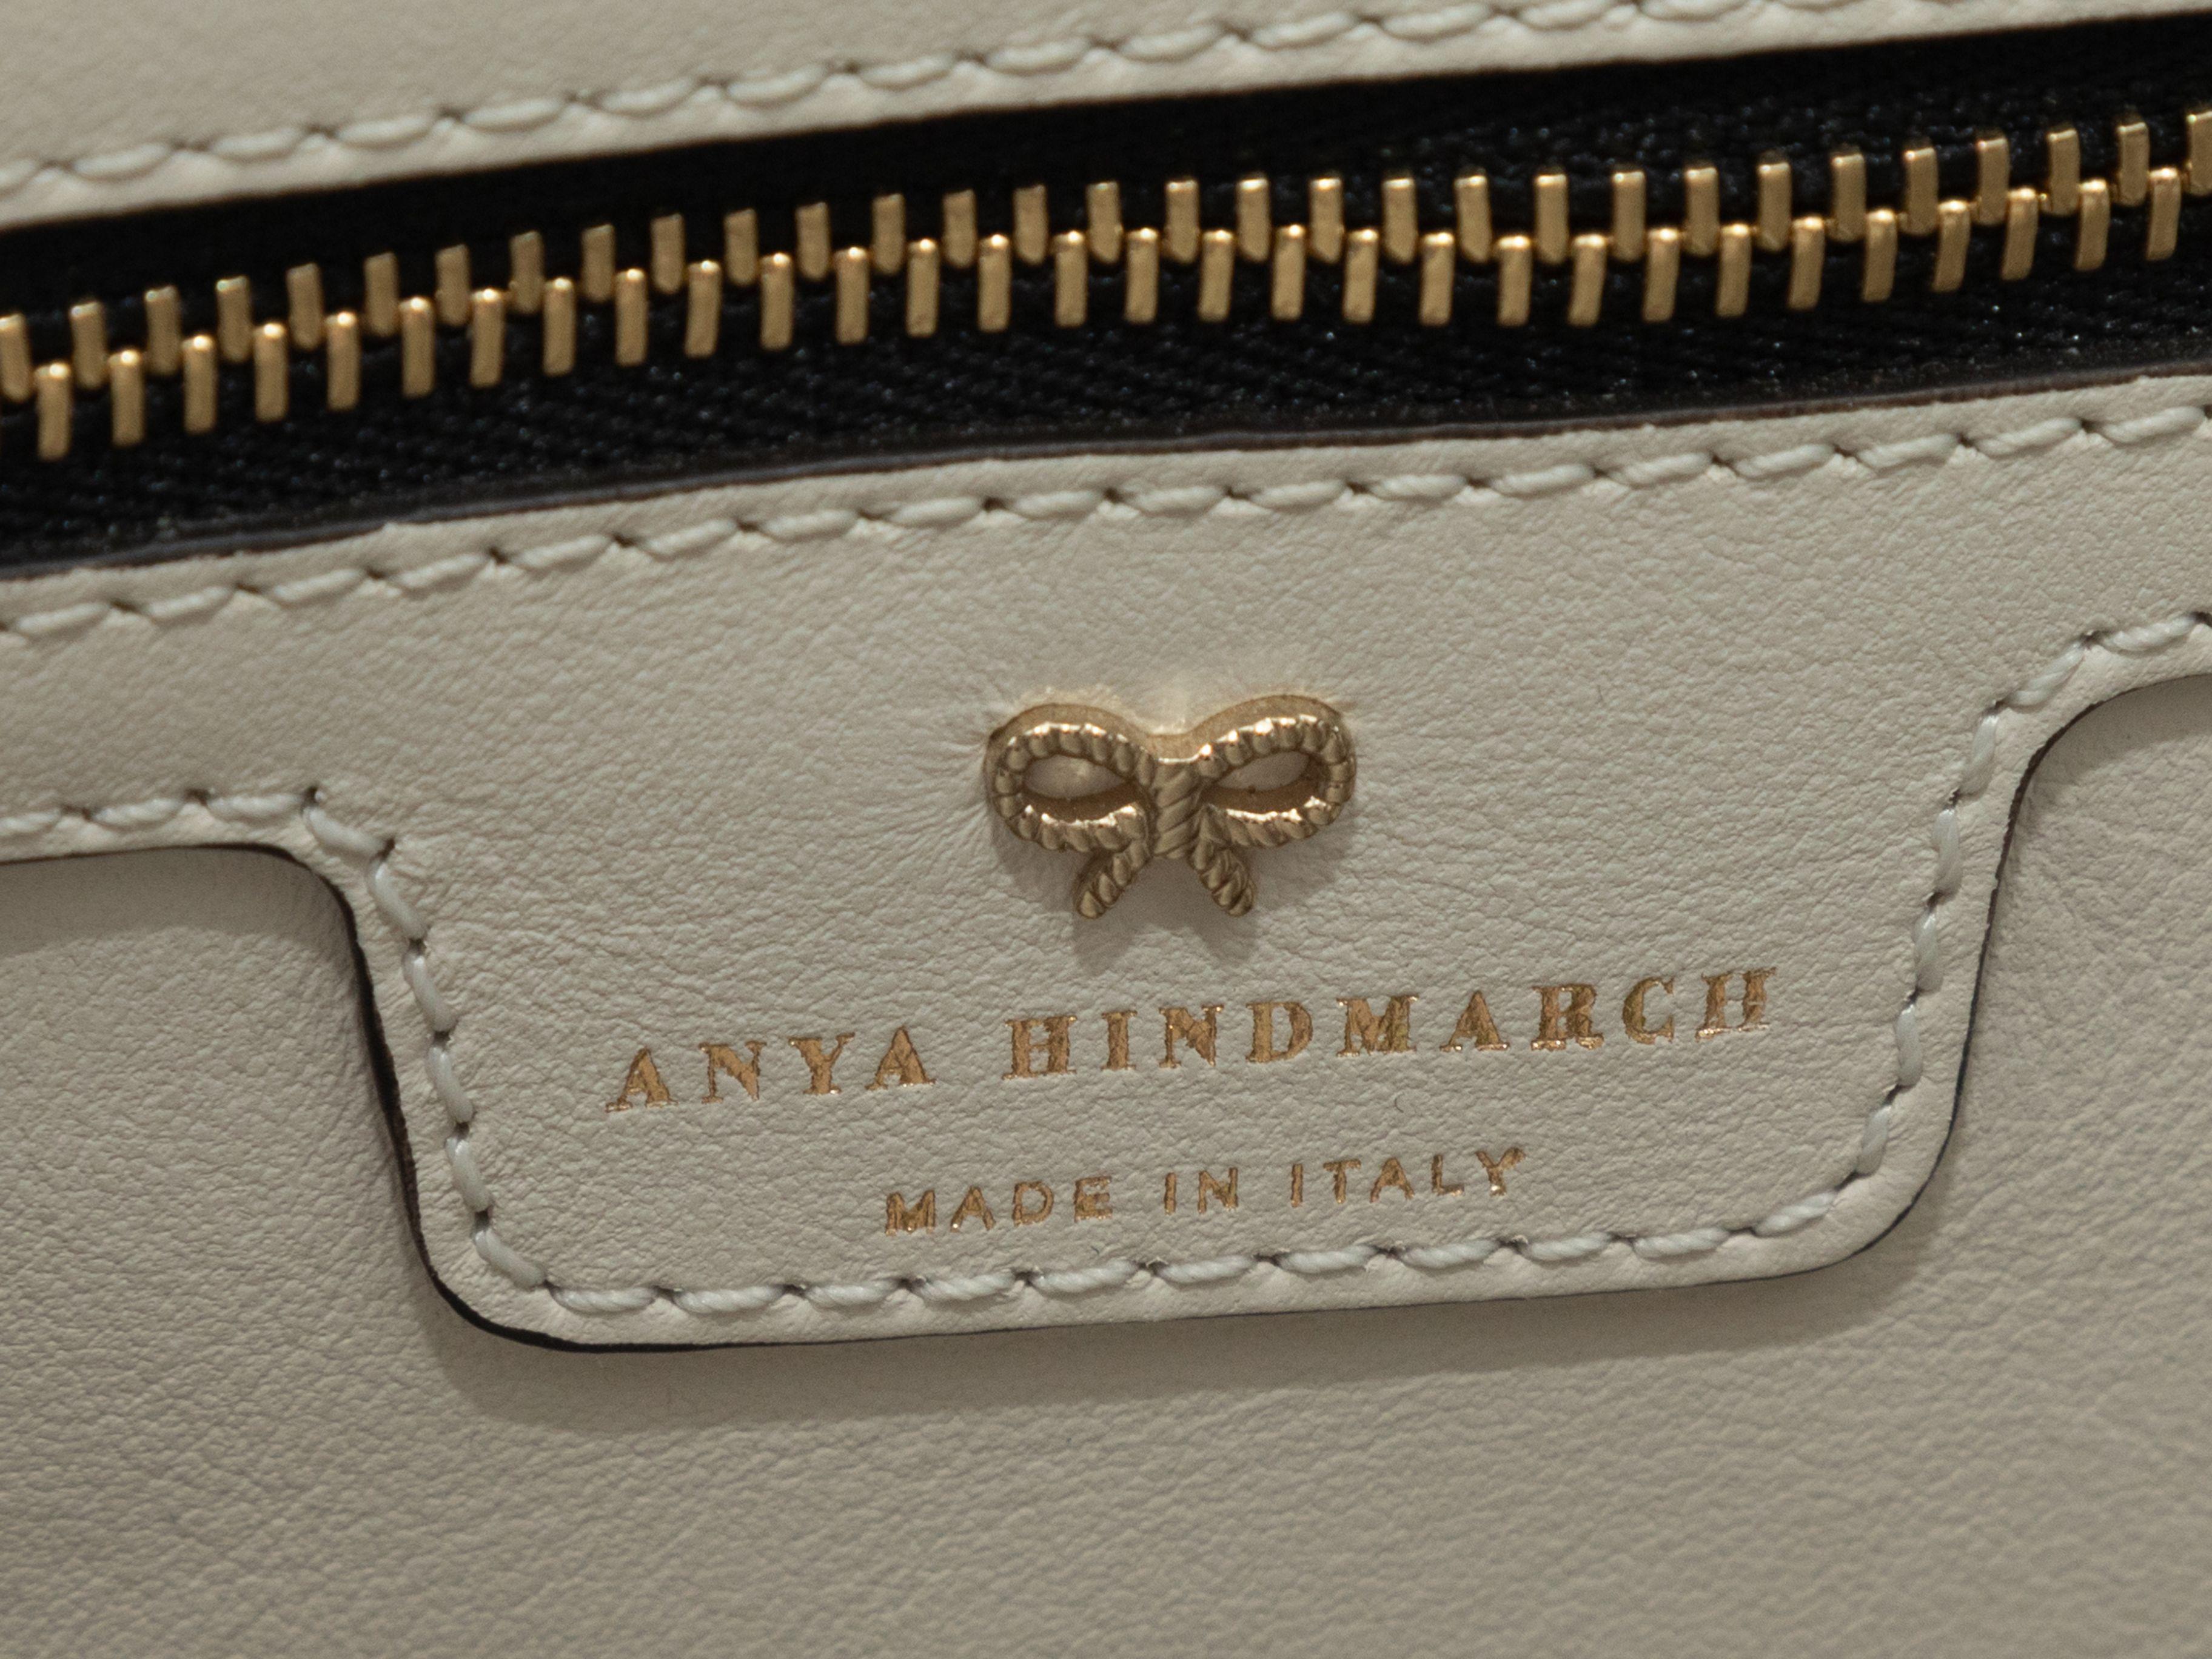 Product Details: White & Multicolor Anya Hindmarch Featherweight Allover Sticker Print Bag. This bag features an embossed leather body, gold-tone hardware, interior zip pocket, and dual rolled top handles. 13.5